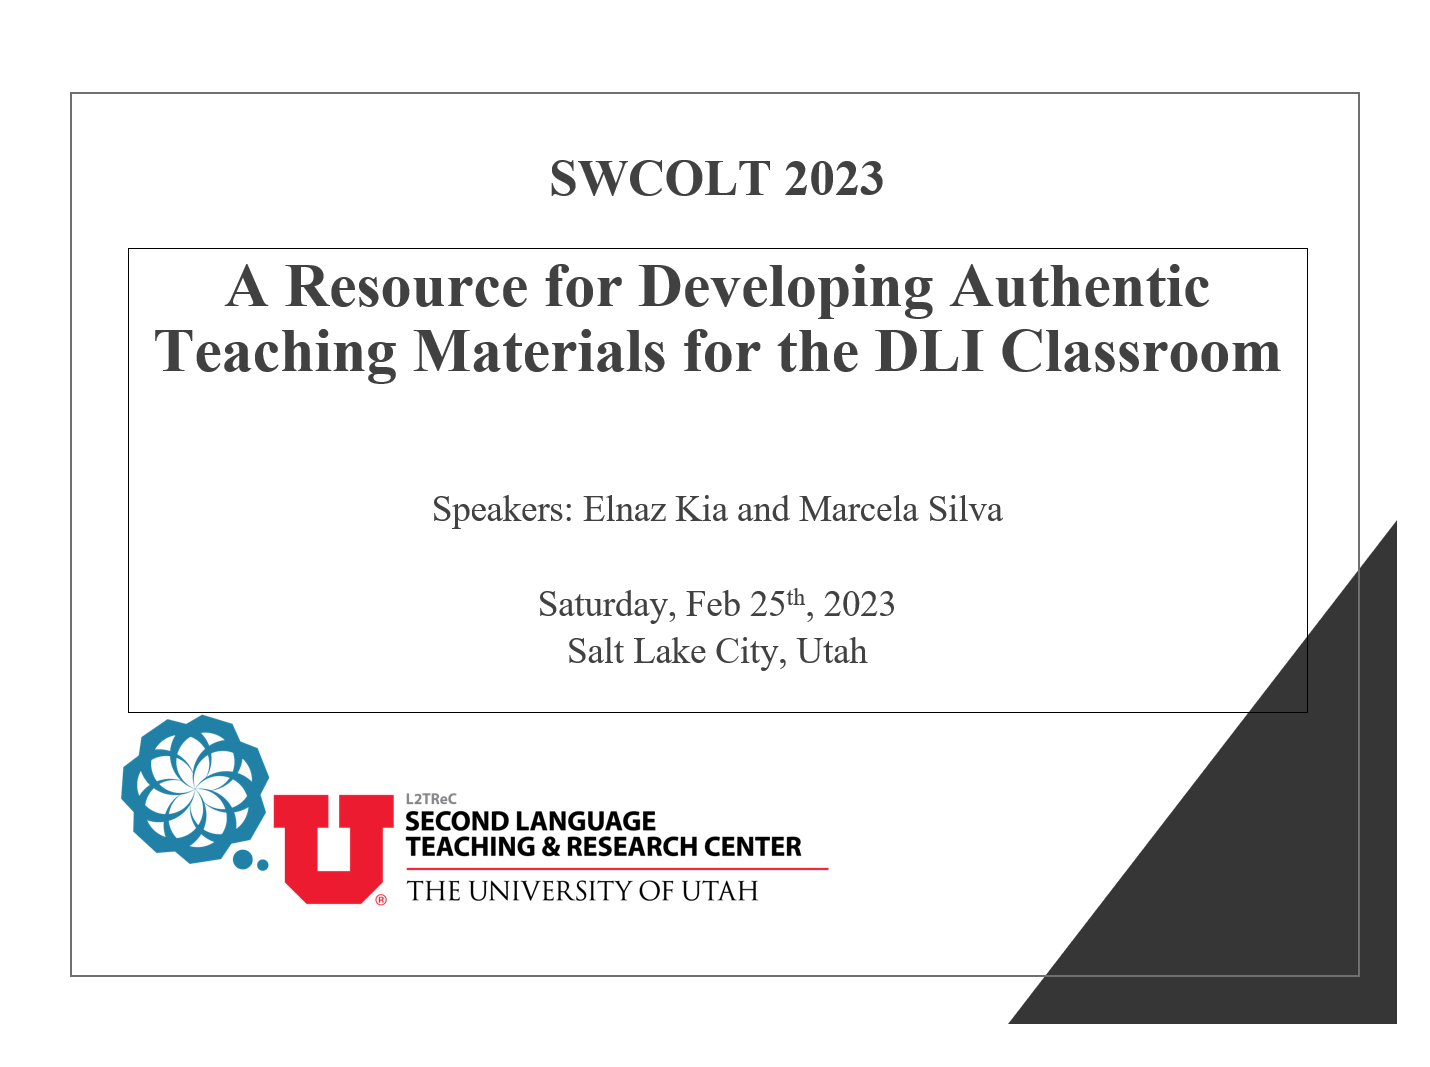 A resource for developing authentic teaching materials for the DLI classroom